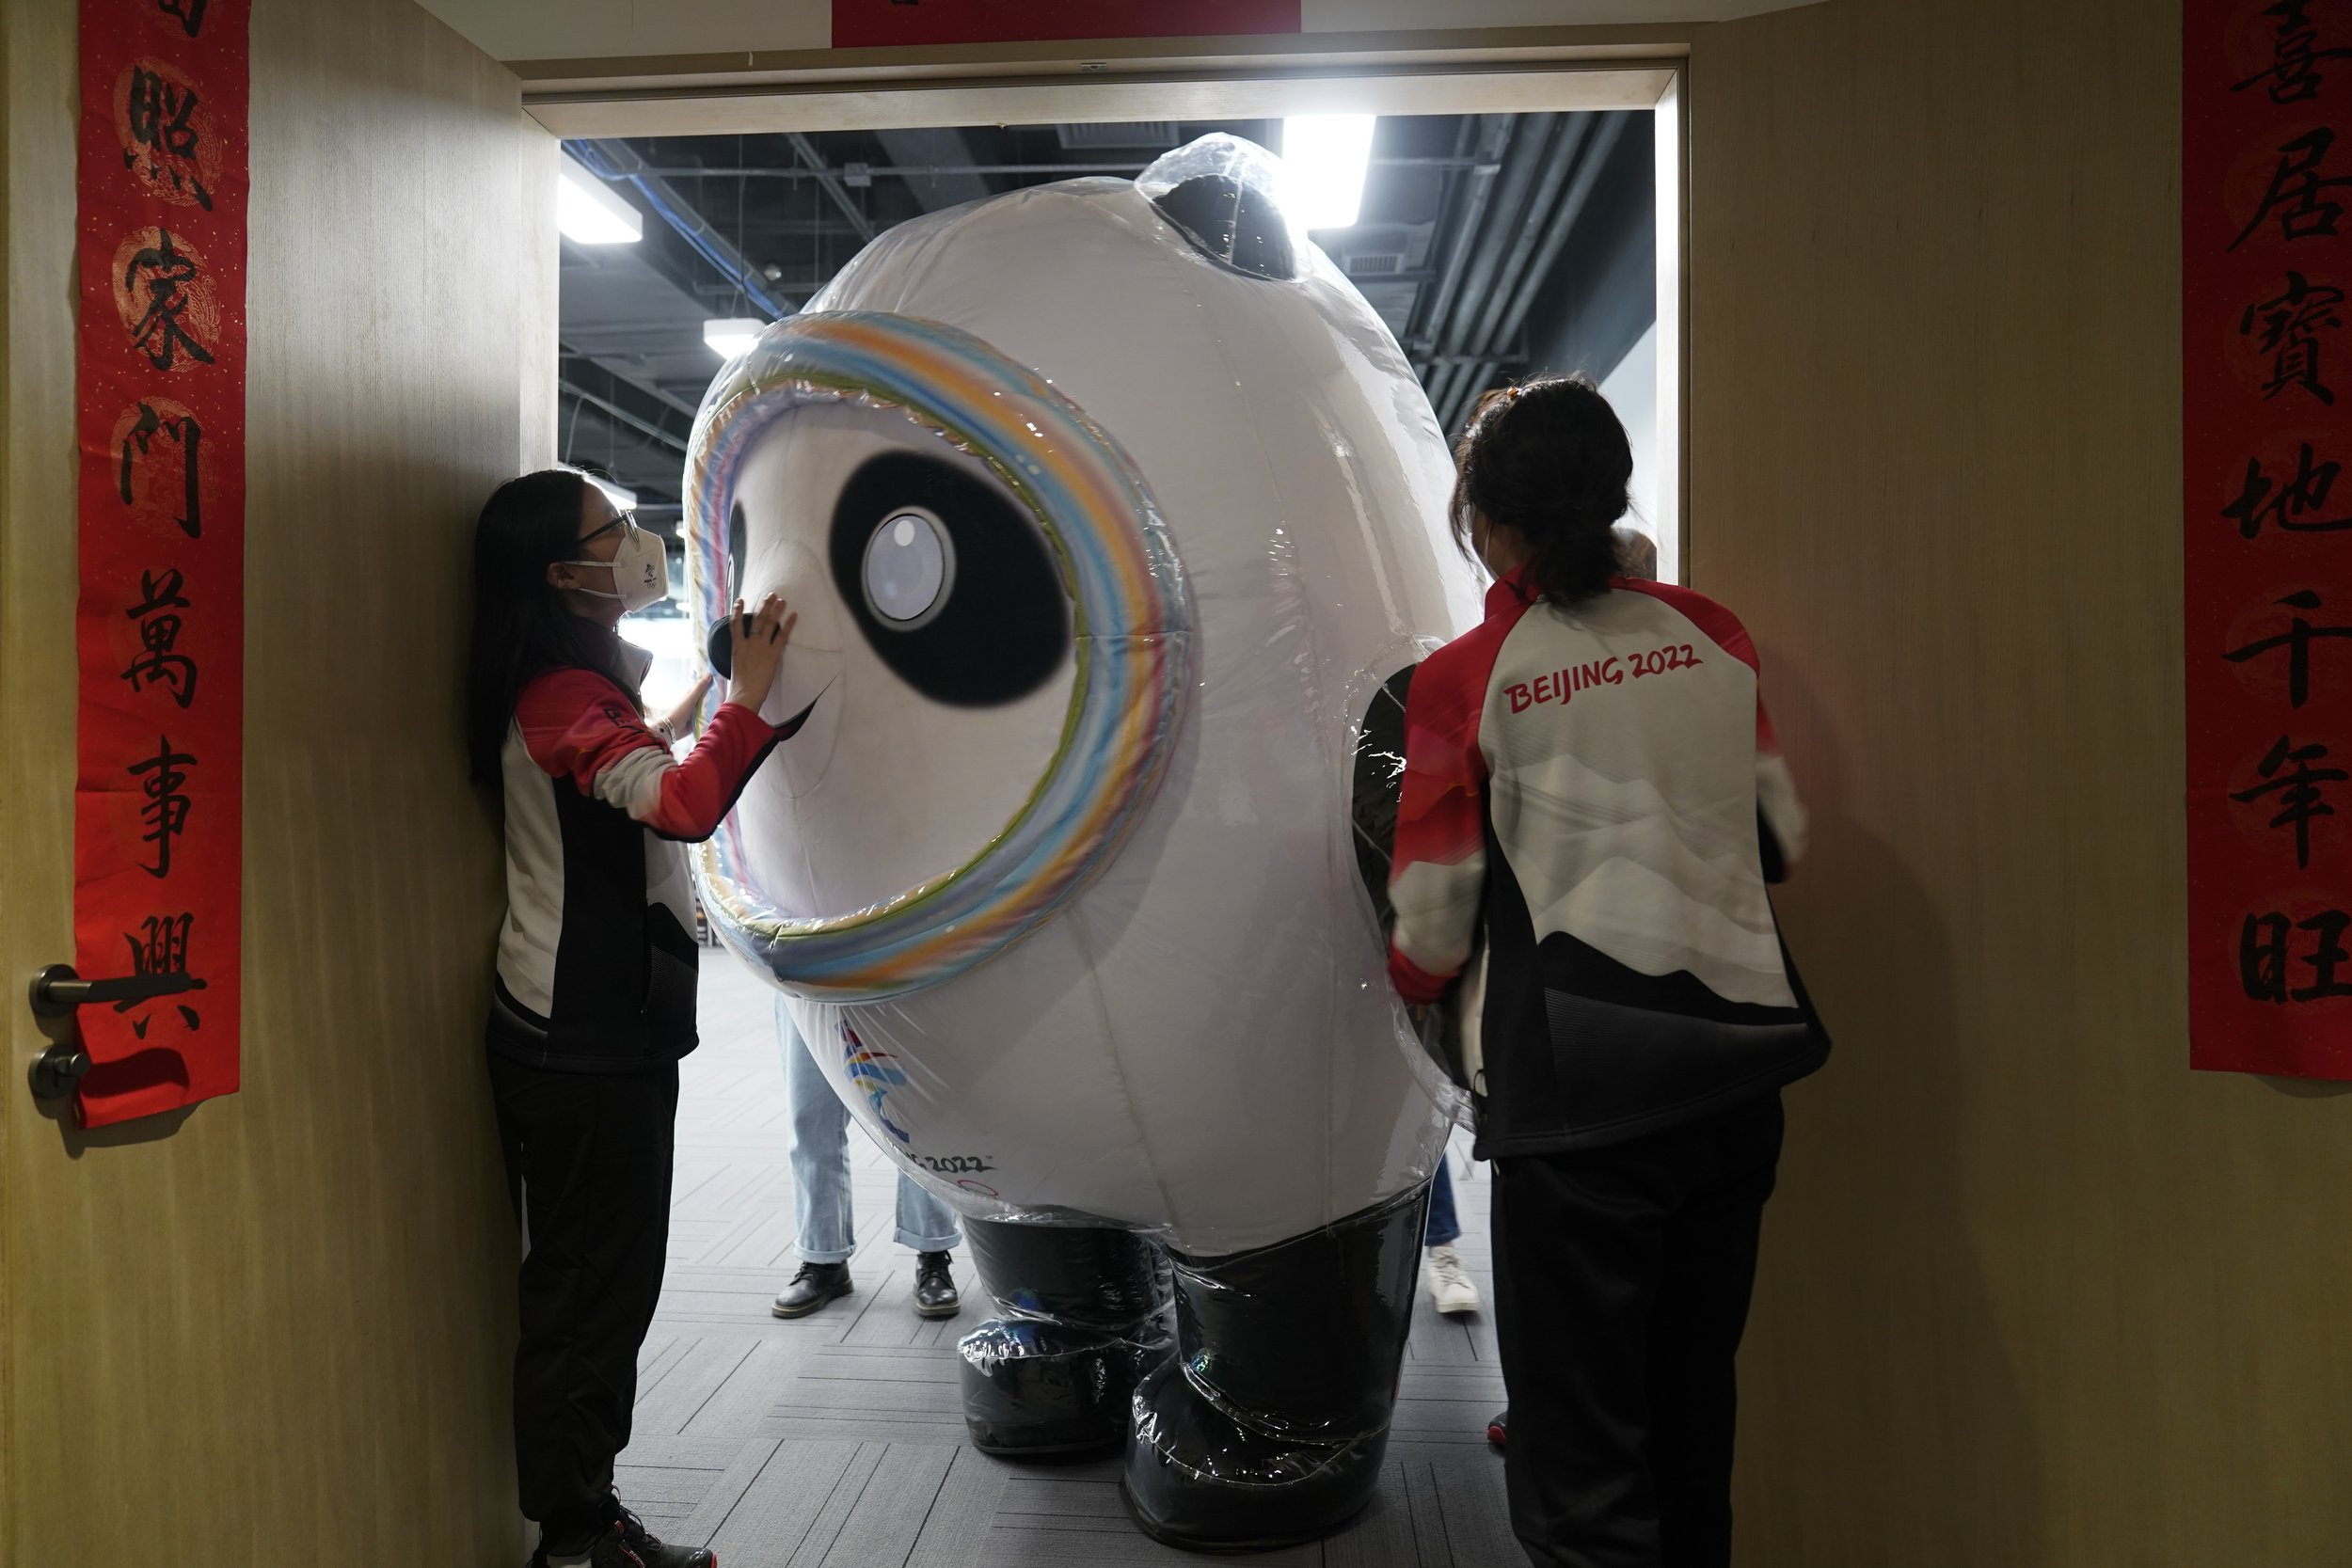  Bing Dwen Dwen, the mascot of the Olympics, turns sideways to exit through the doors after visiting the Xinhua news agency's office at the 2022 Winter Olympics, Feb. 8, 2022, in Beijing. (AP Photo/Jae C. Hong) 